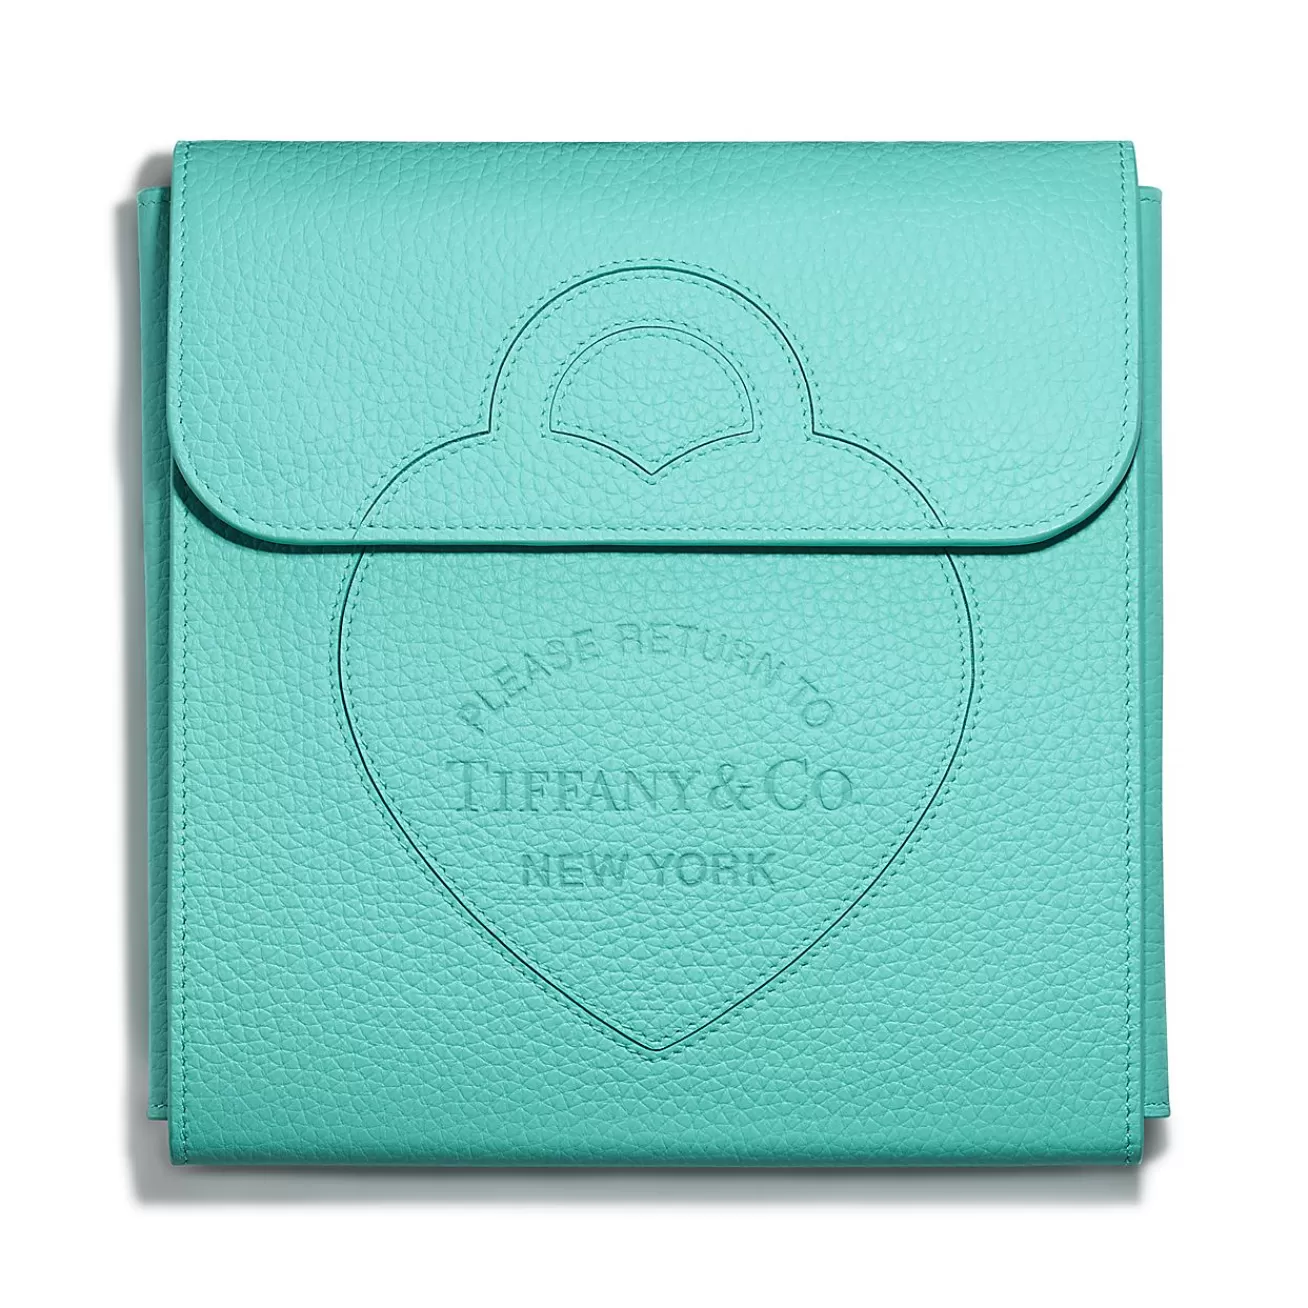 Tiffany & Co. Return to Tiffany® Pouch in Tiffany Blue® Leather, Large | ^Women Tiffany Blue® Gifts | Small Leather Goods